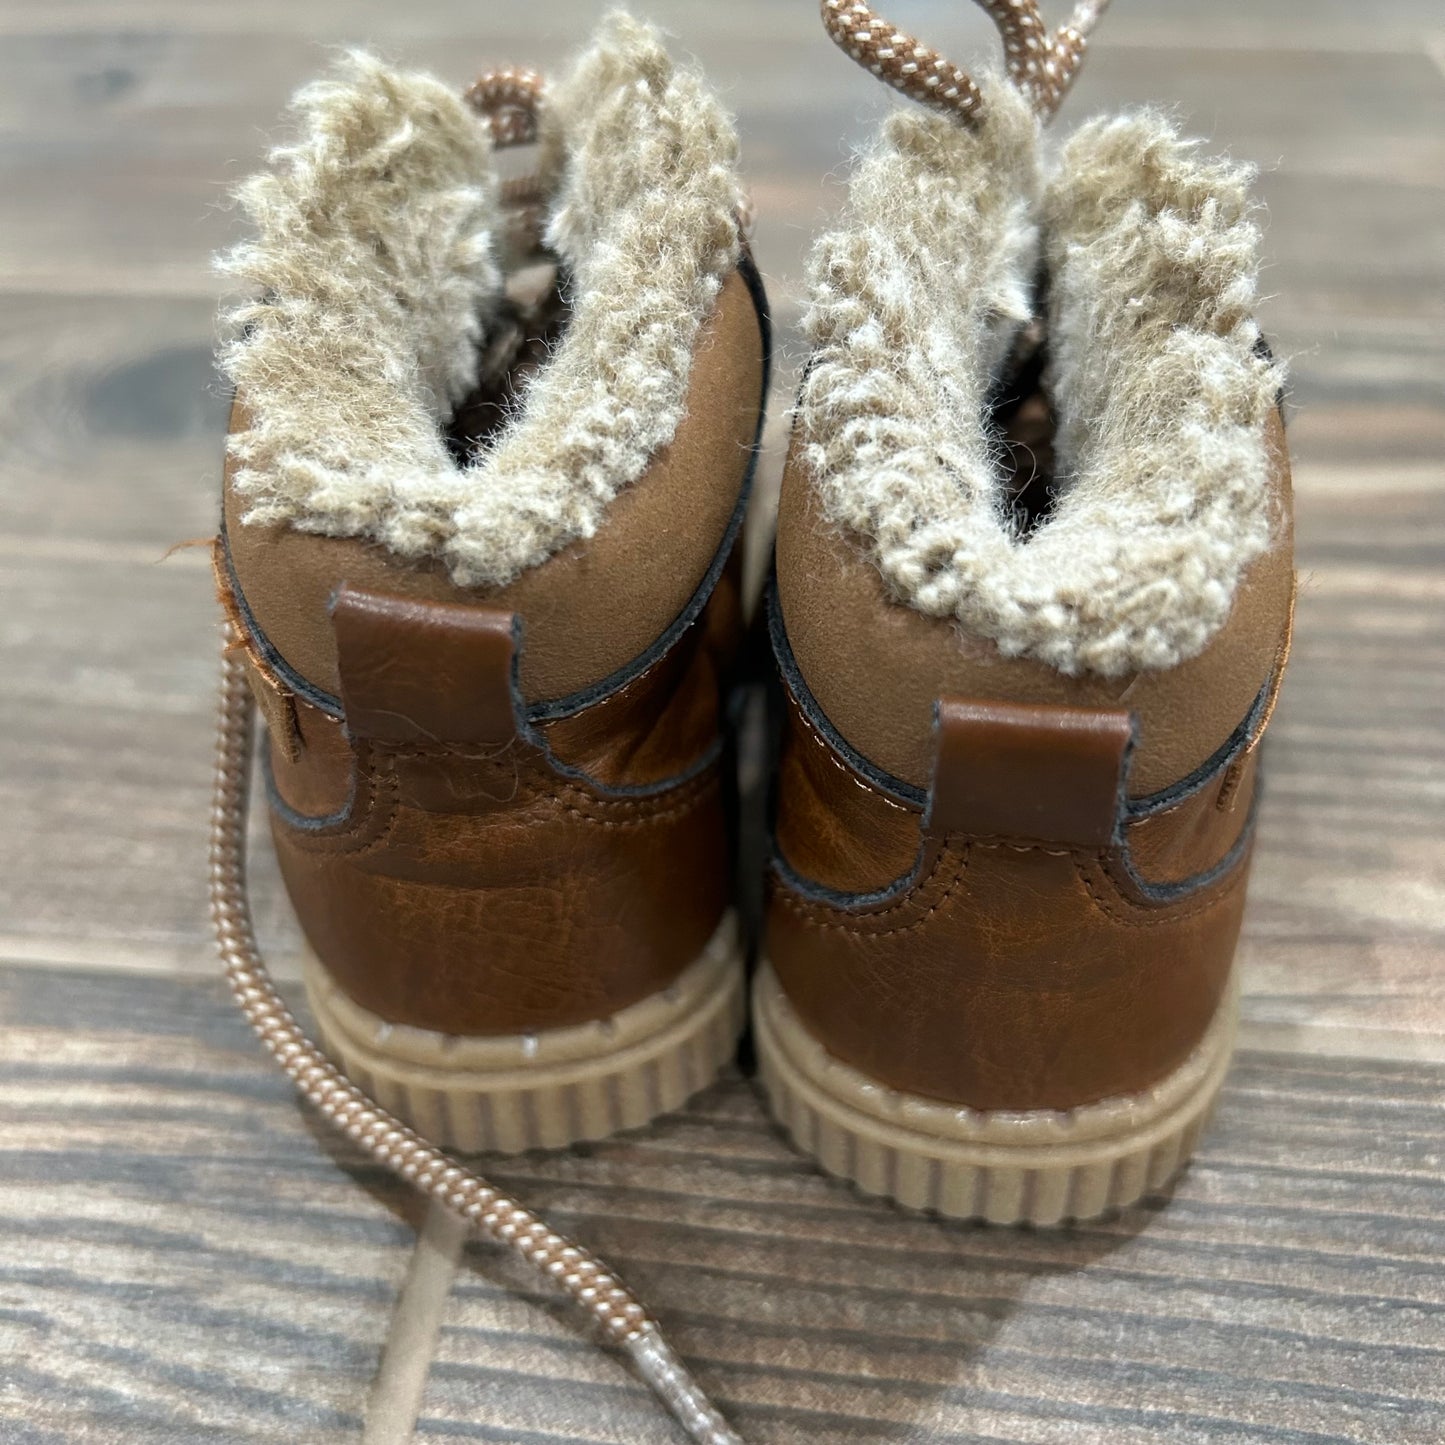 Size 6 (Toddler) Osh Kosh Brown Boots - Good Used Condition